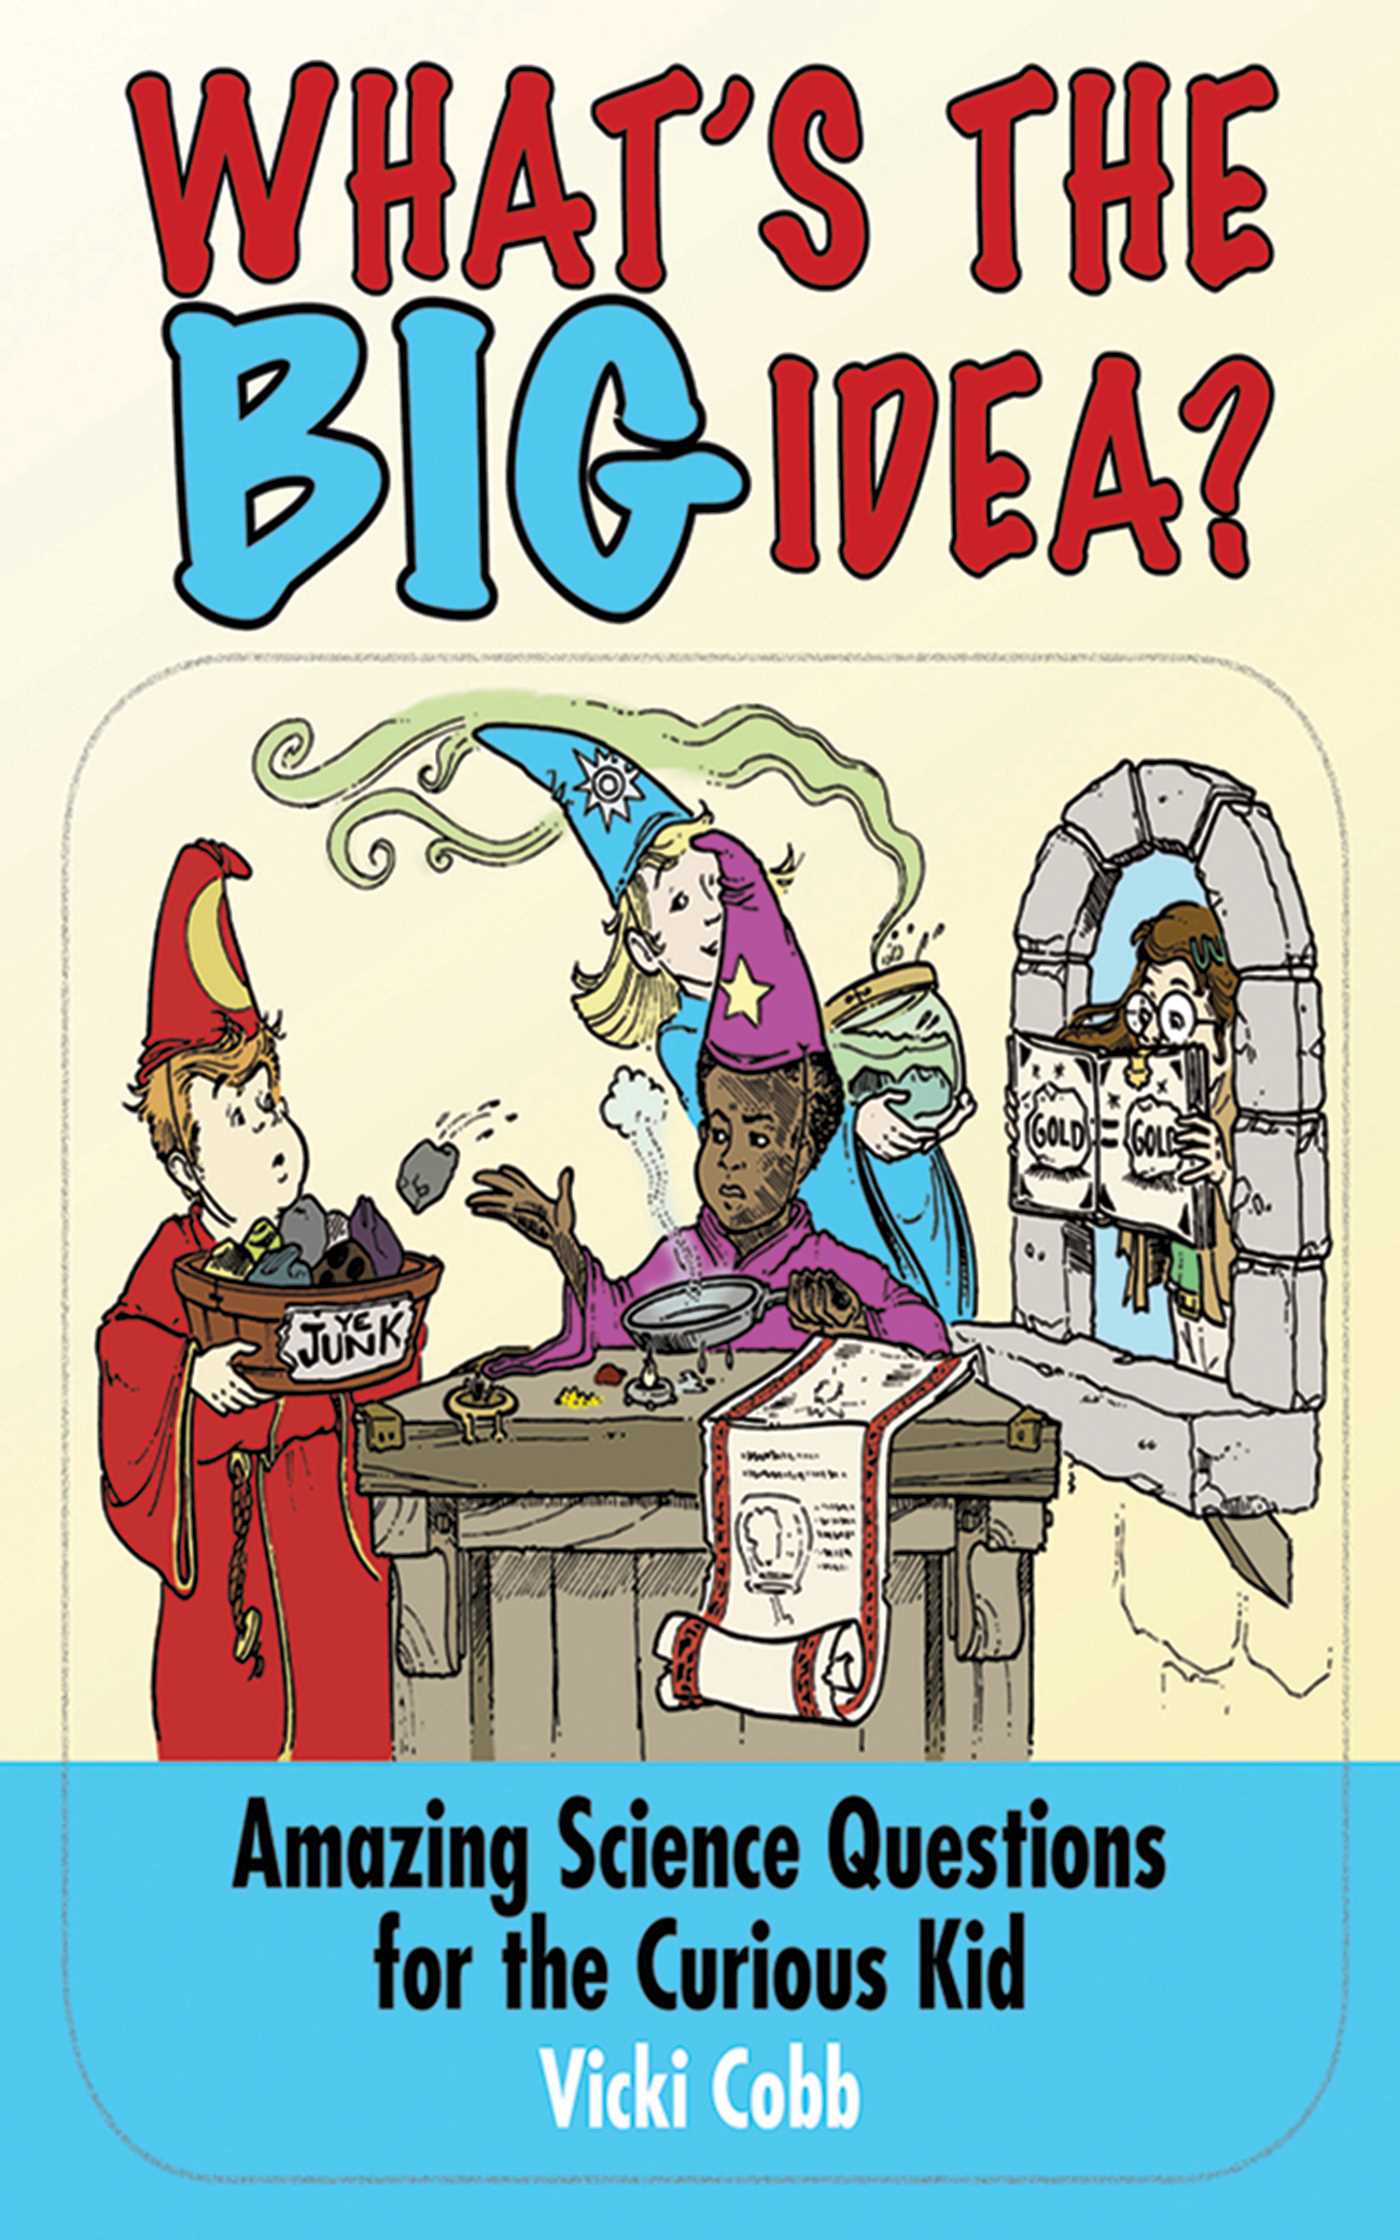 BIG　the　Science　Paperback)　Idea?　Curious　Amazing　Kid　Questions　for　What's　the